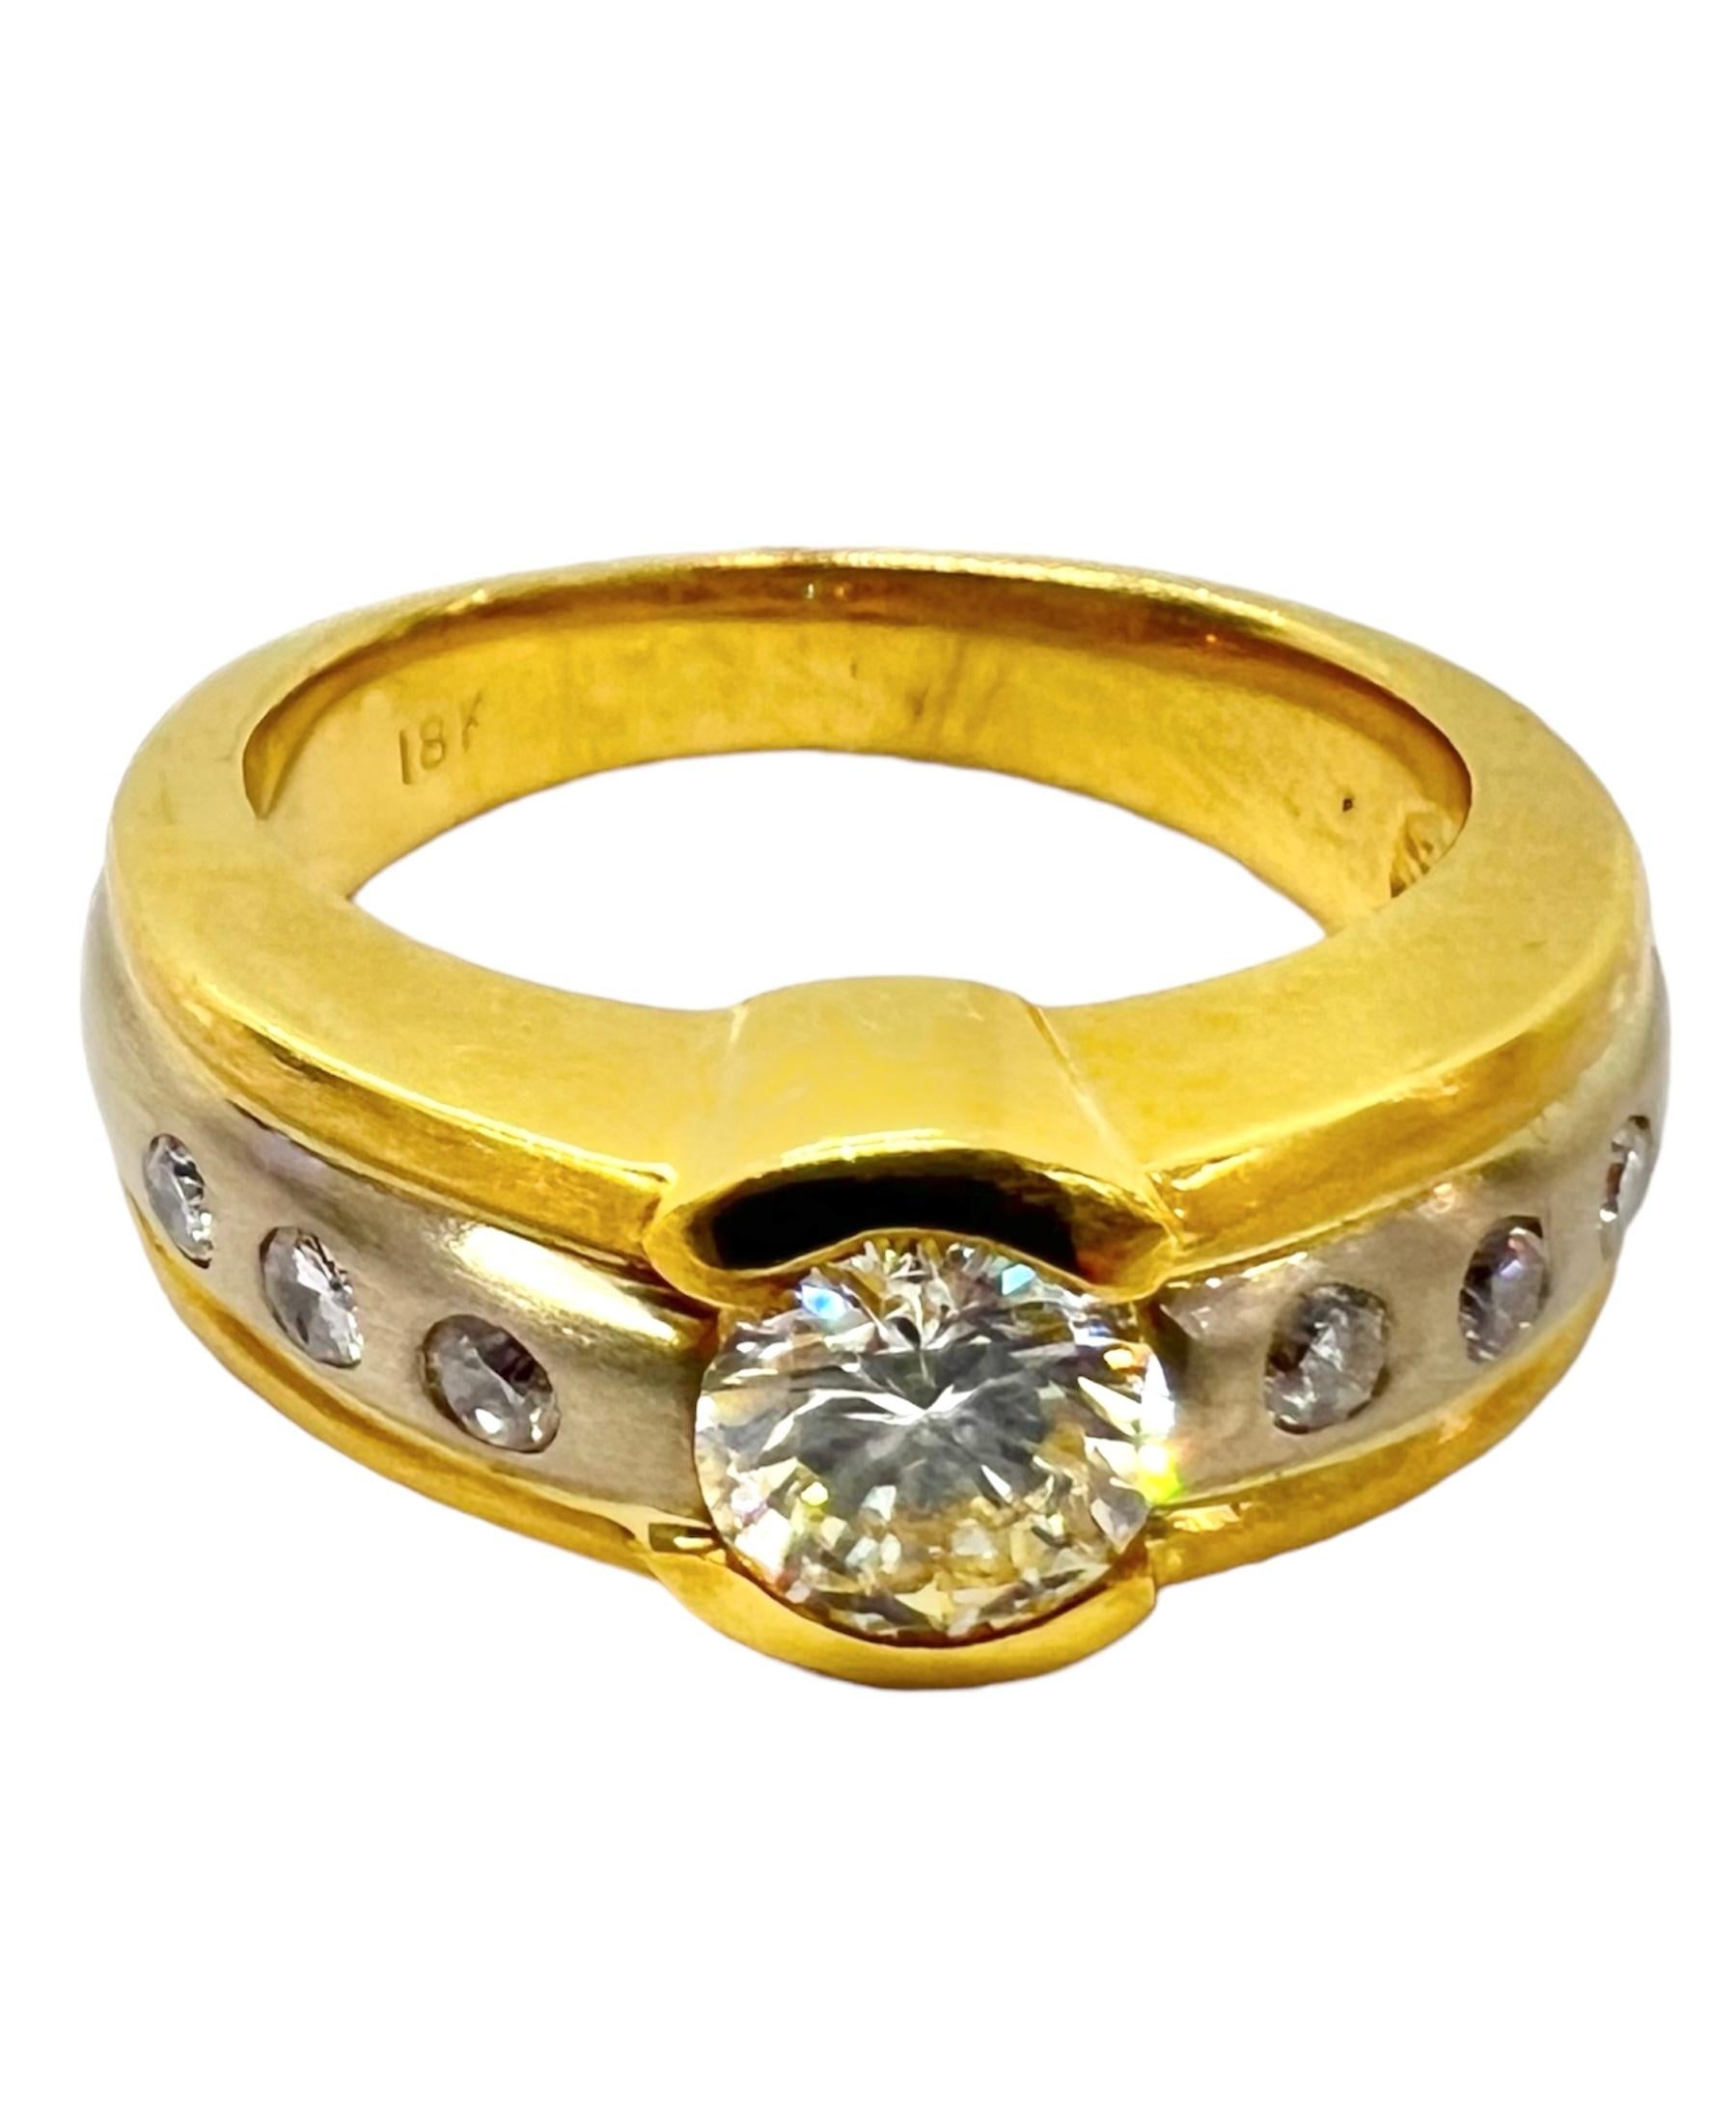 18K yellow gold and platinum round diamond with small round diamonds. 

Sophia D by Joseph Dardashti LTD has been known worldwide for 35 years and are inspired by classic Art Deco design that merges with modern manufacturing techniques.  